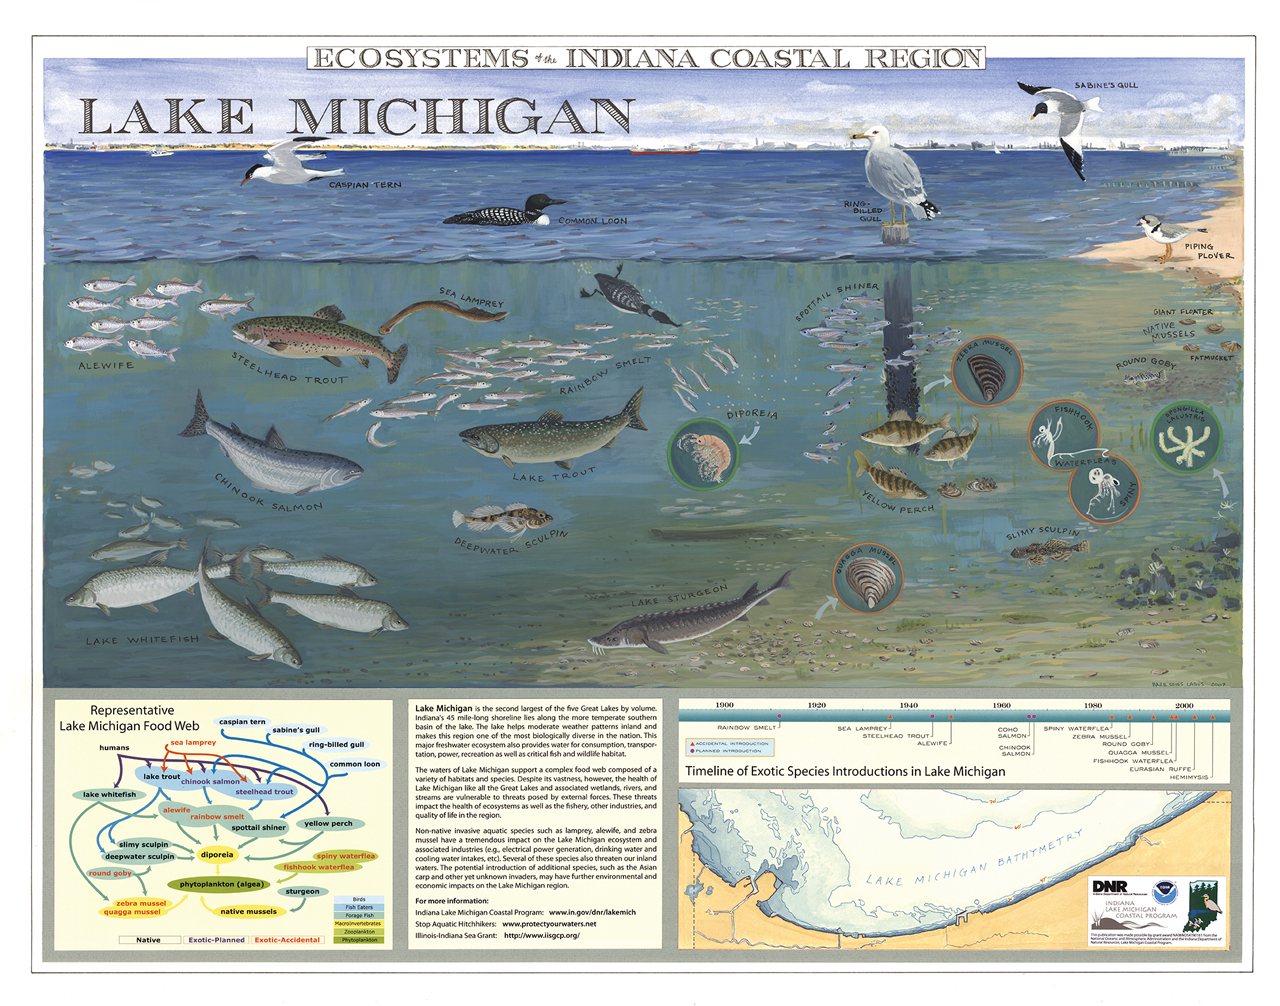 Four illustrated panels show Lake Michigan aquatic species, food webs, and a species timeline for the lake, with the words, Lake Michigan” and “Ecosystems of the Indiana Coastal Region.”